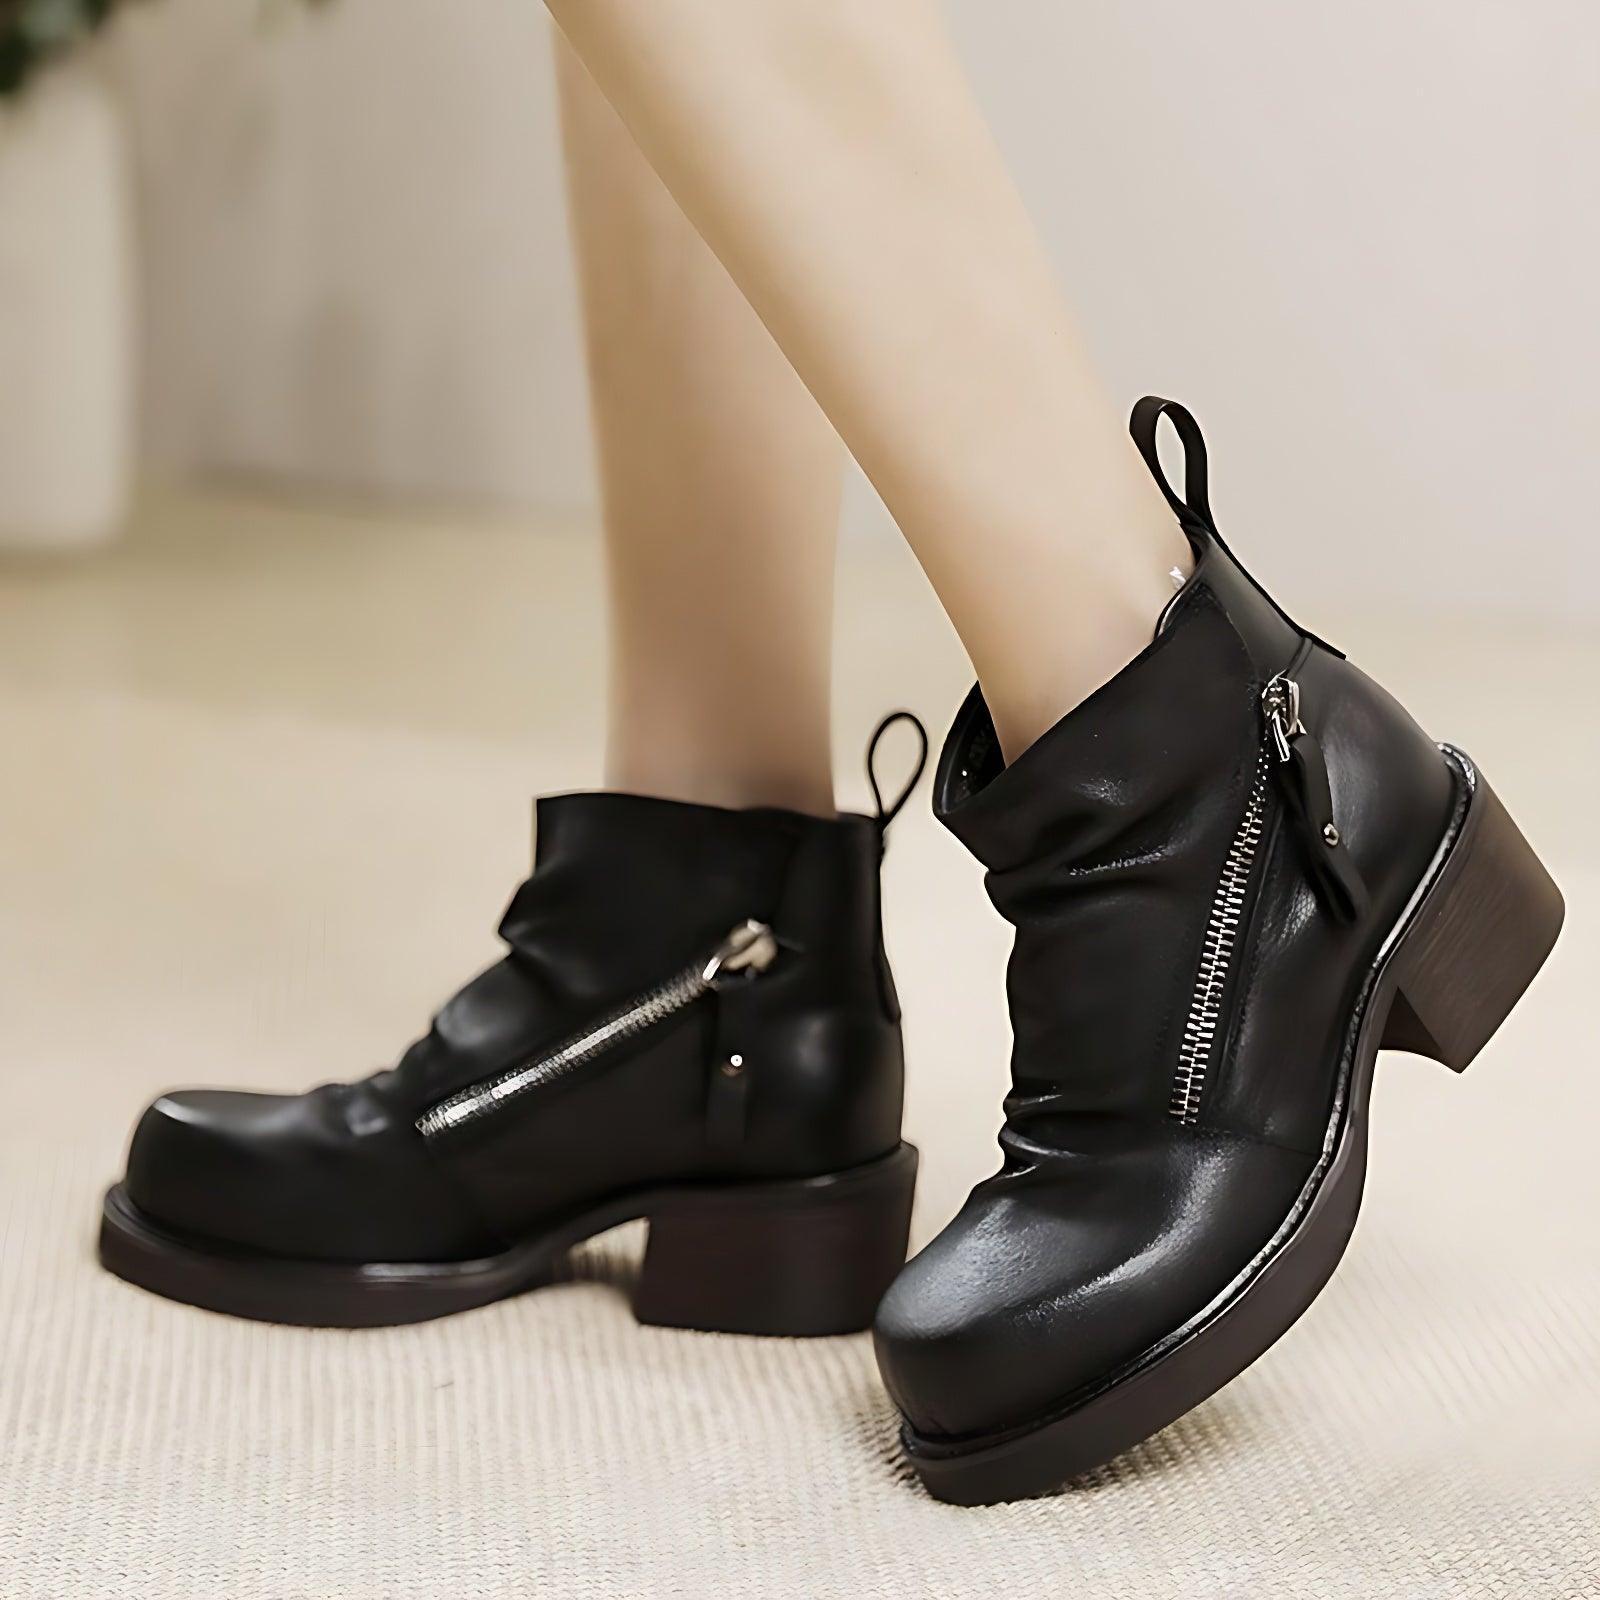 Black Shoes - Touchy Style .